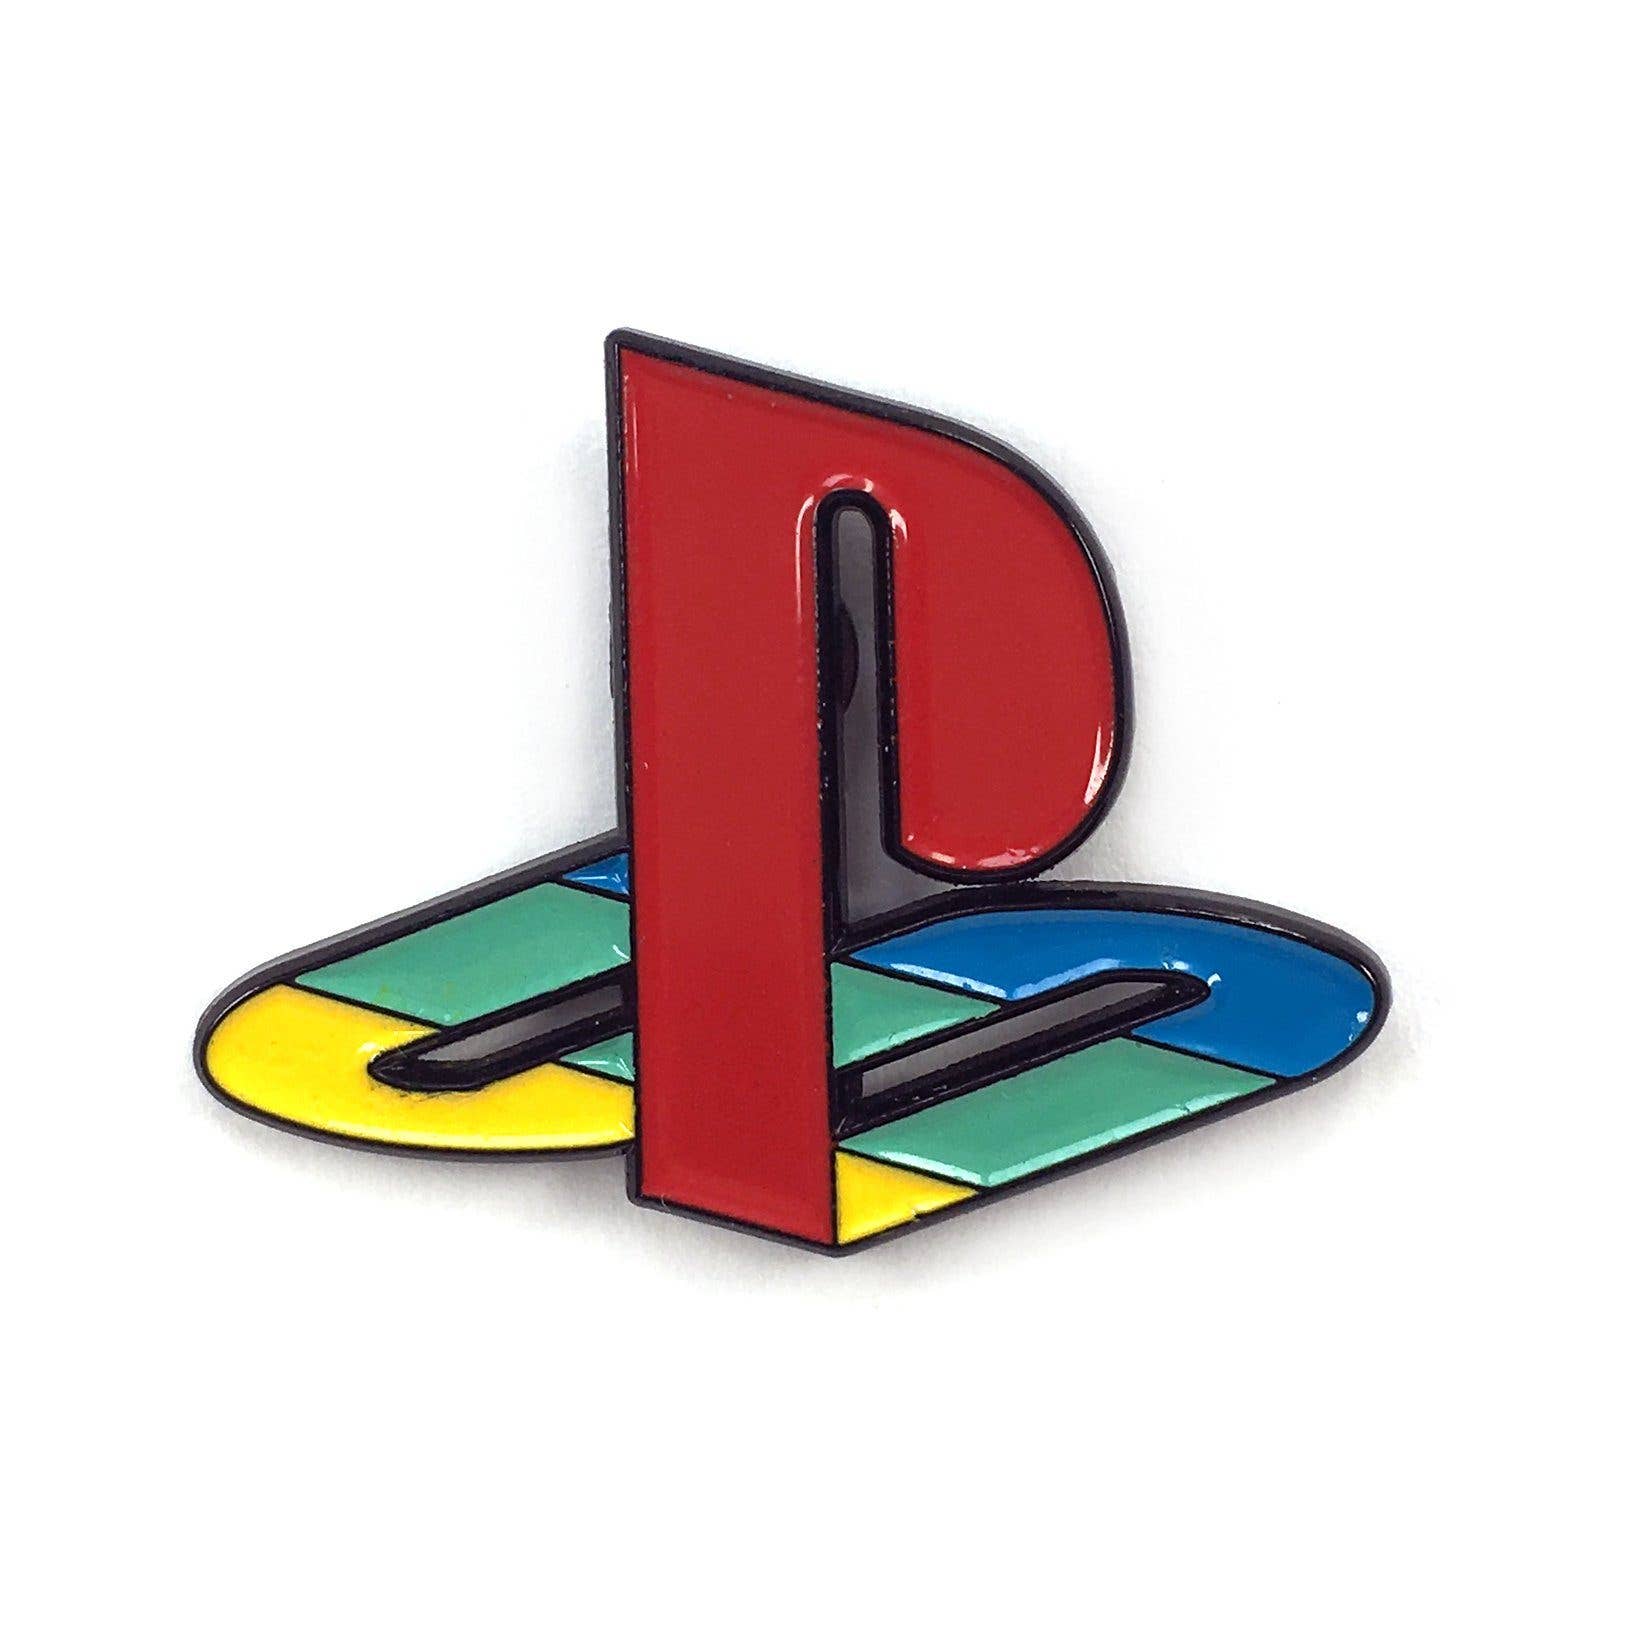 Pin on game PlayStation